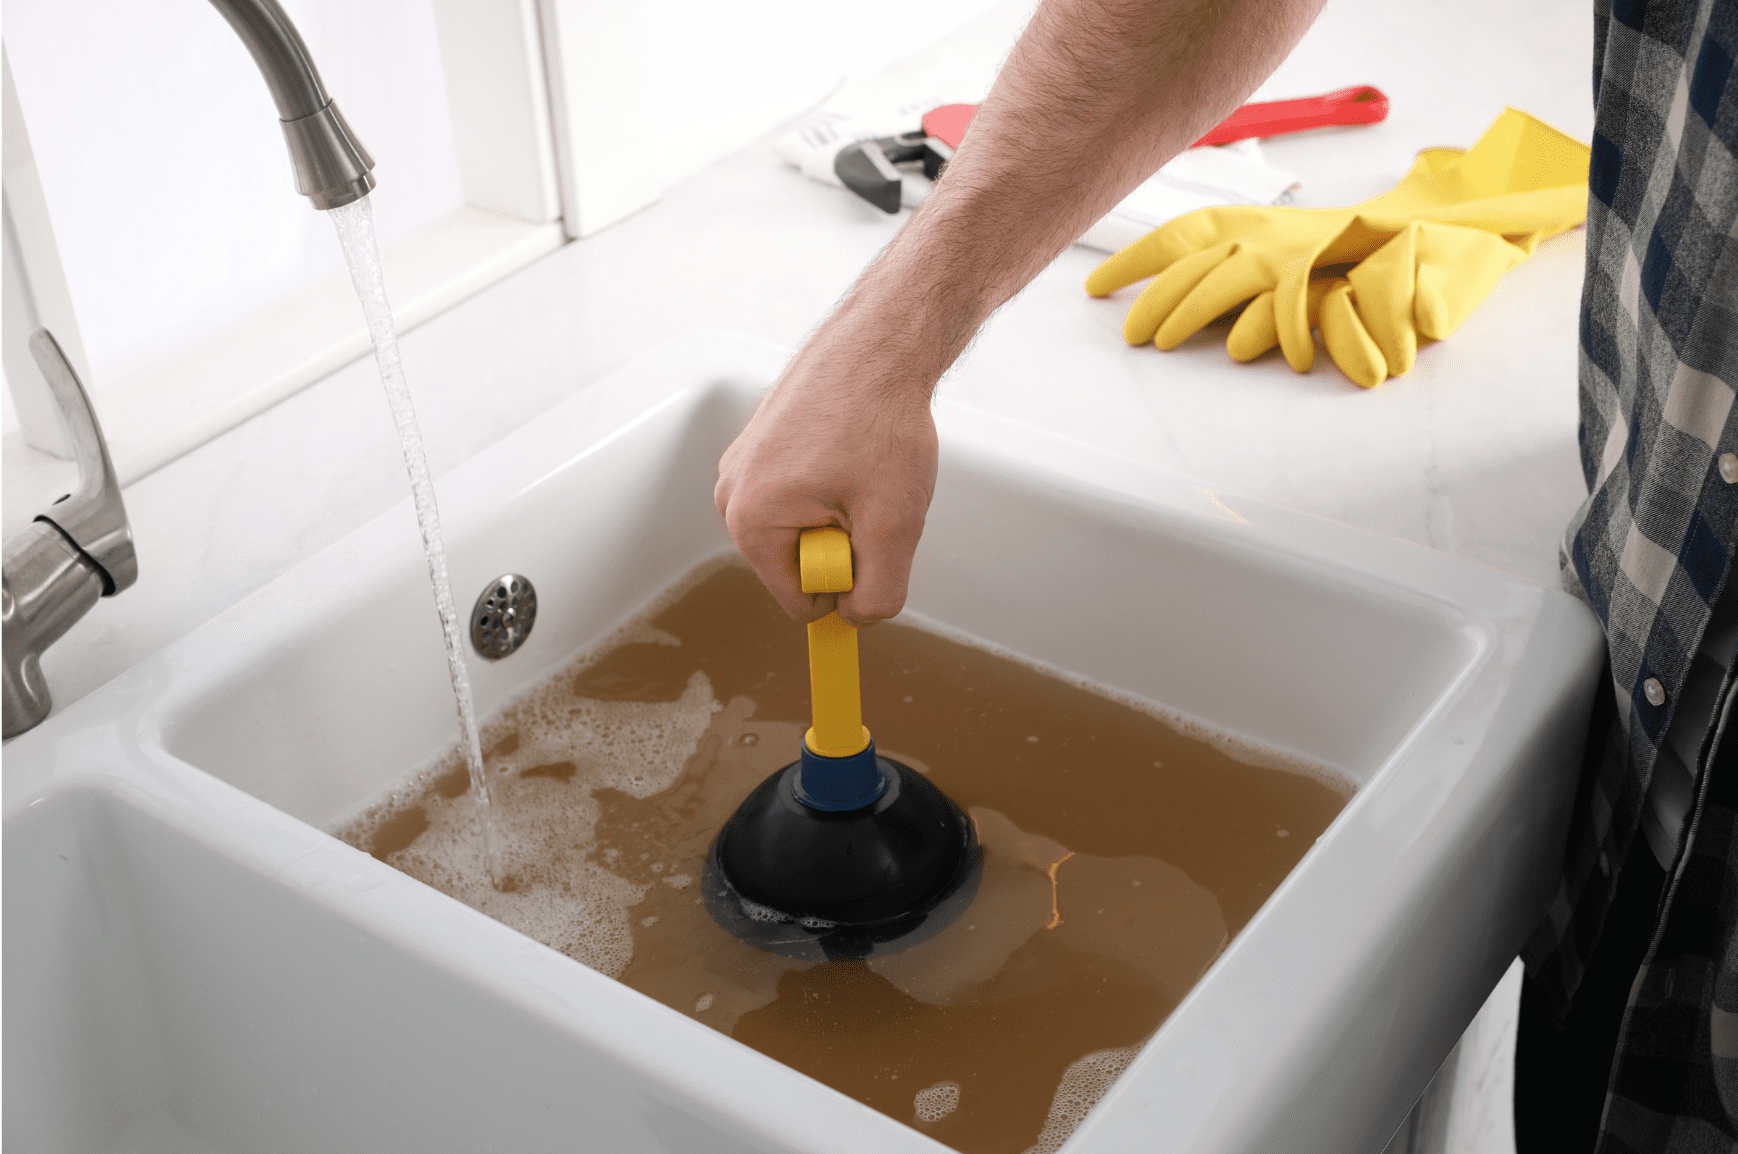 Can You Use Drano With a Septic Tank?